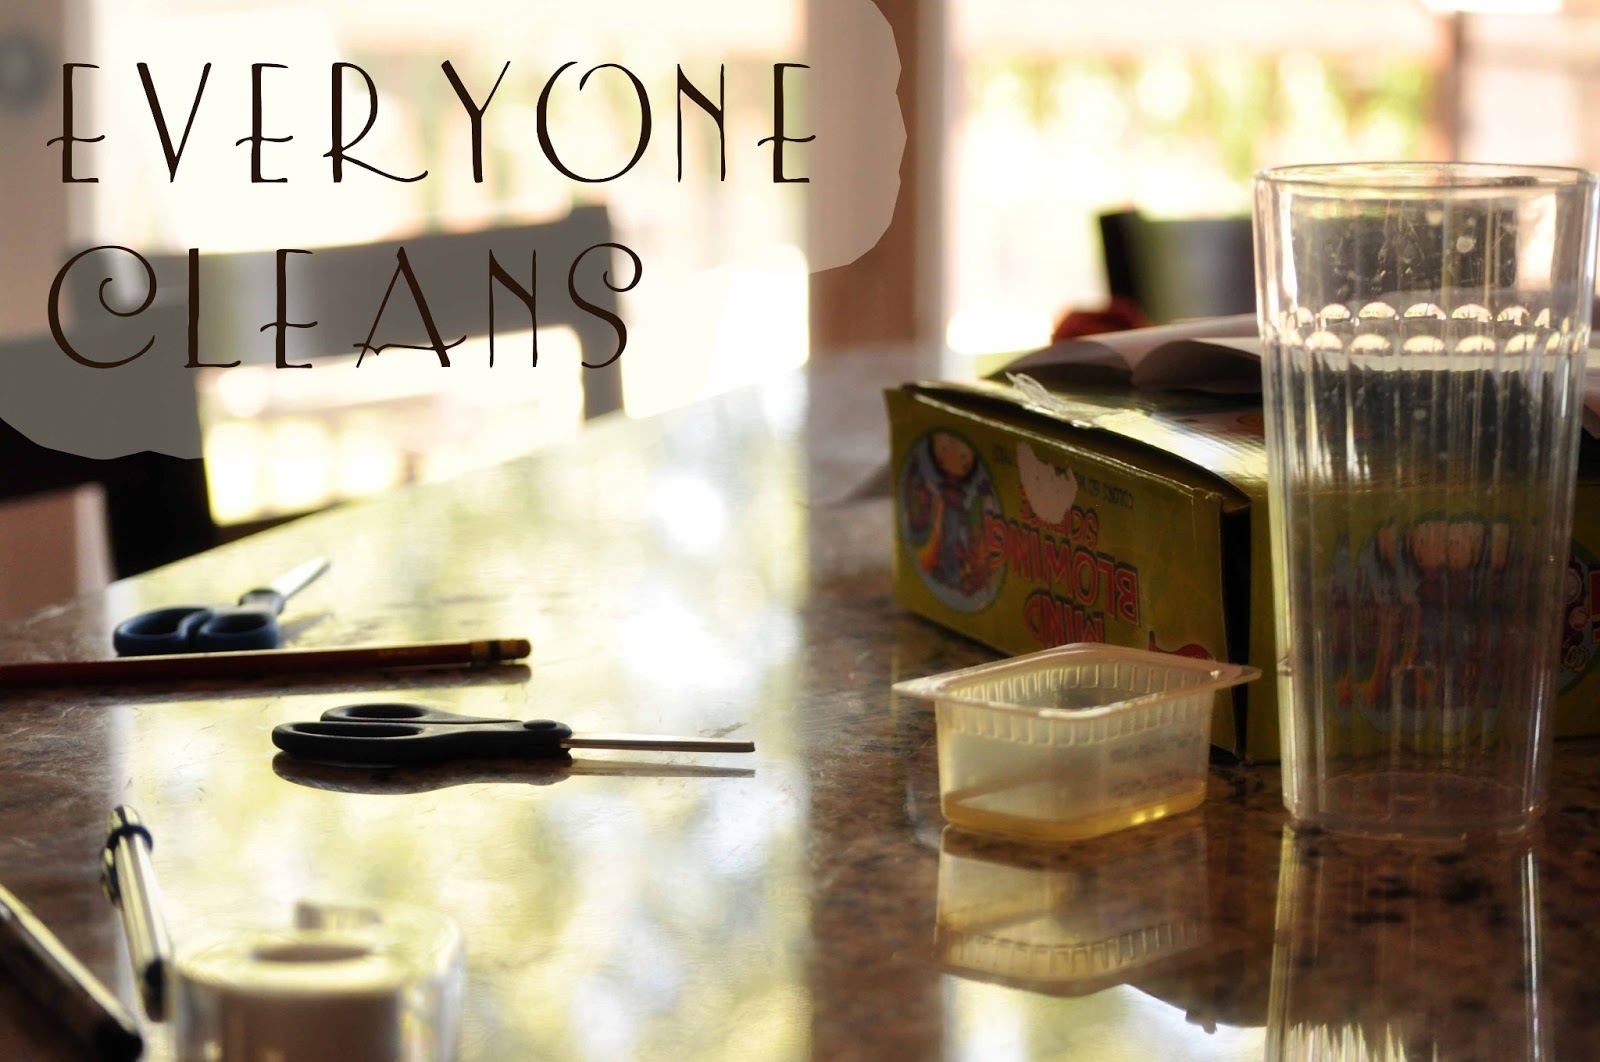 Everyone Cleans - Chronicles of a Babywise Mom1600 x 1062